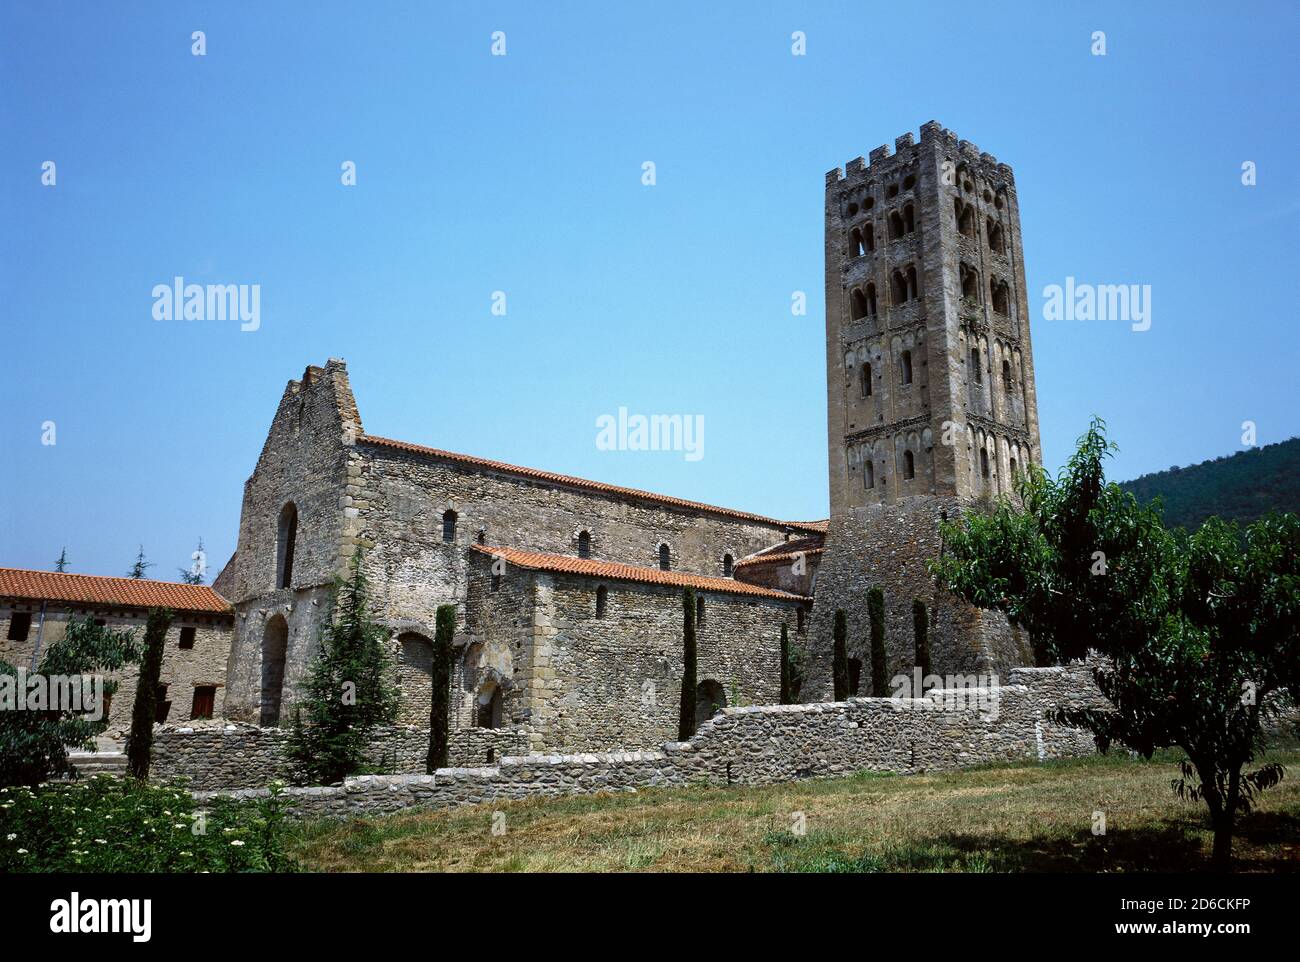 France. Pyrenees-Orientales departament. Occitanie Region. The Abbey of Saint-Michel de Cuxa. Benedictine abbey, consecrated in 974. Exterior view of the pre-Romanesque style church, 10th century and Lombard Romanesque bell tower, 11th century. Stock Photo